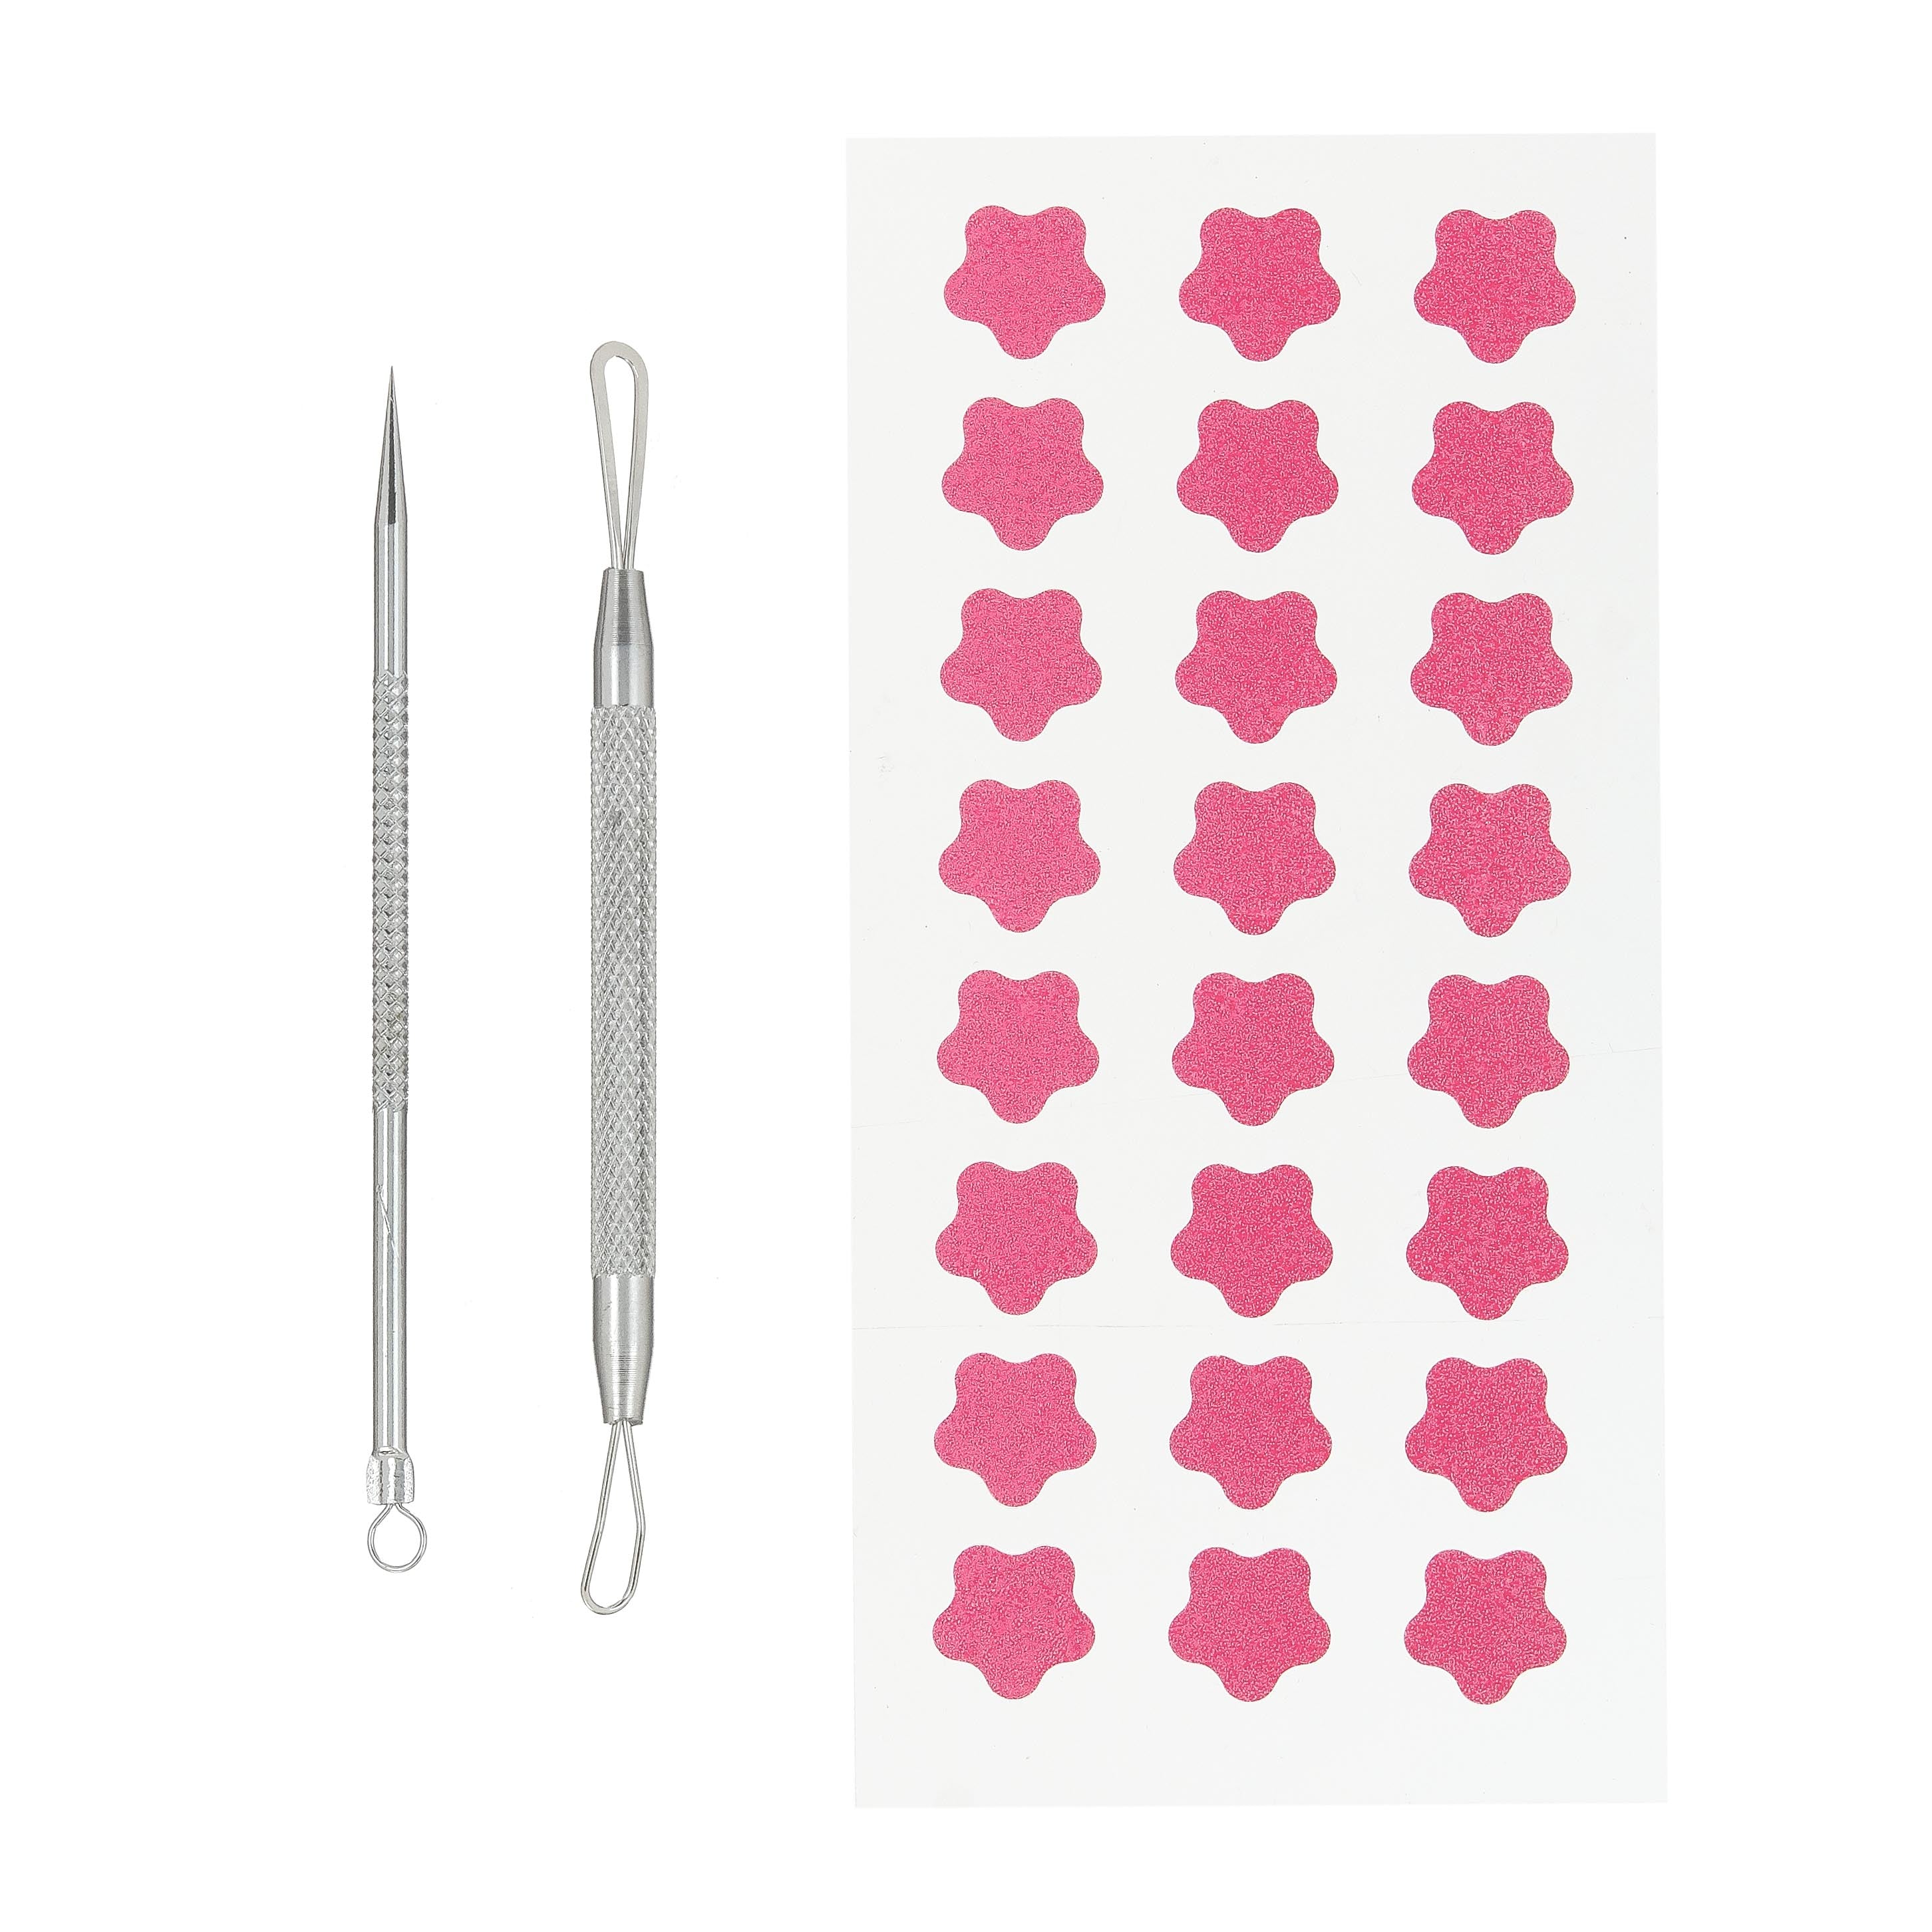 DOUBLE SIDED PORE EXTRACTOR & BLEMISH PATCH KIT - ROSE EXTRACT